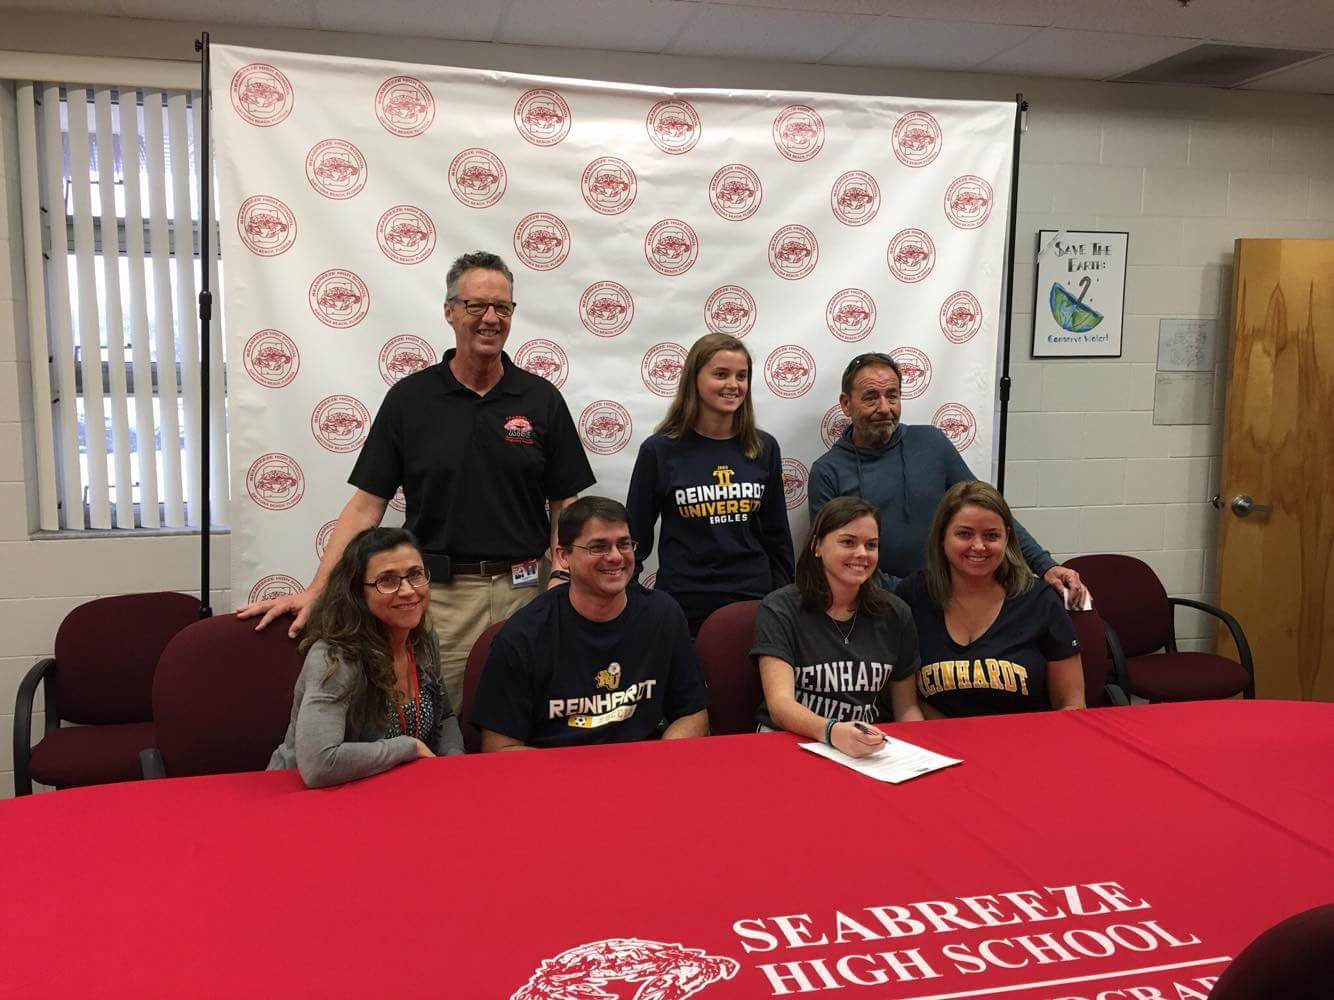 Kaylee Haas from Seabreeze High School commits to play soccer at the next level at Reinhardt University. Photo courtesy of Renee Haas